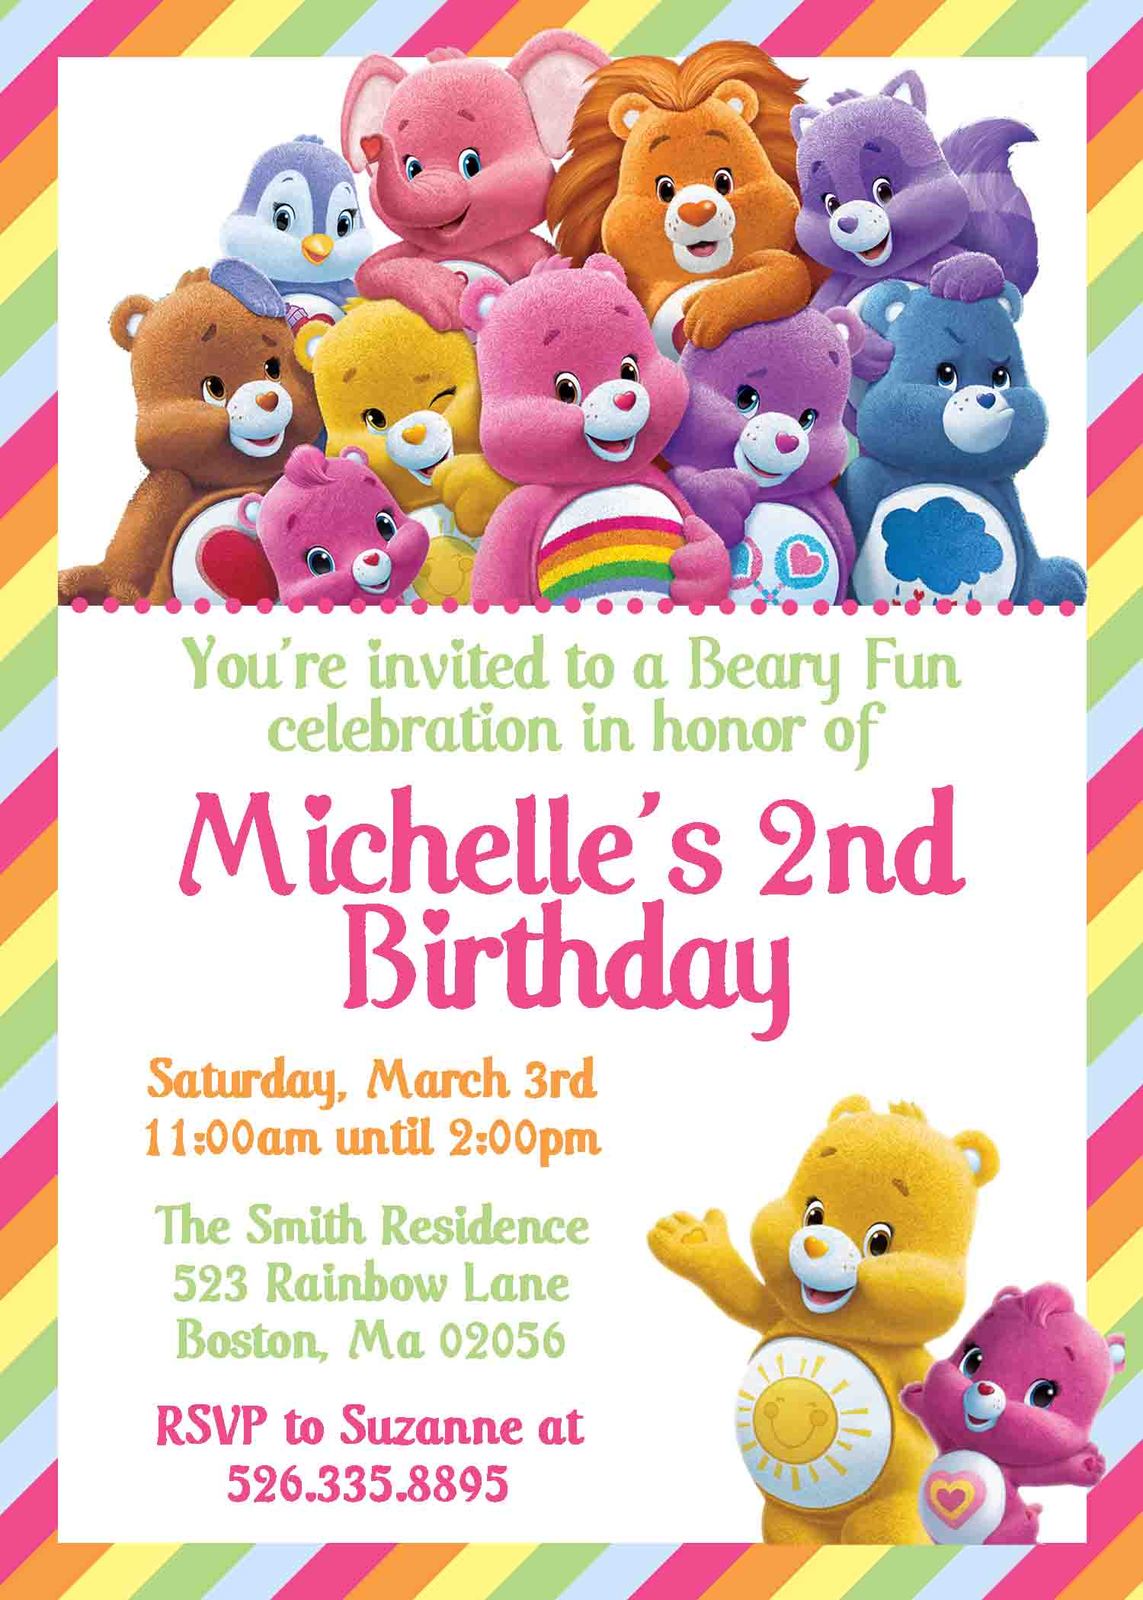 custom-photo-products-with-personality-free-care-bear-invitations-bear-invitations-care-bear